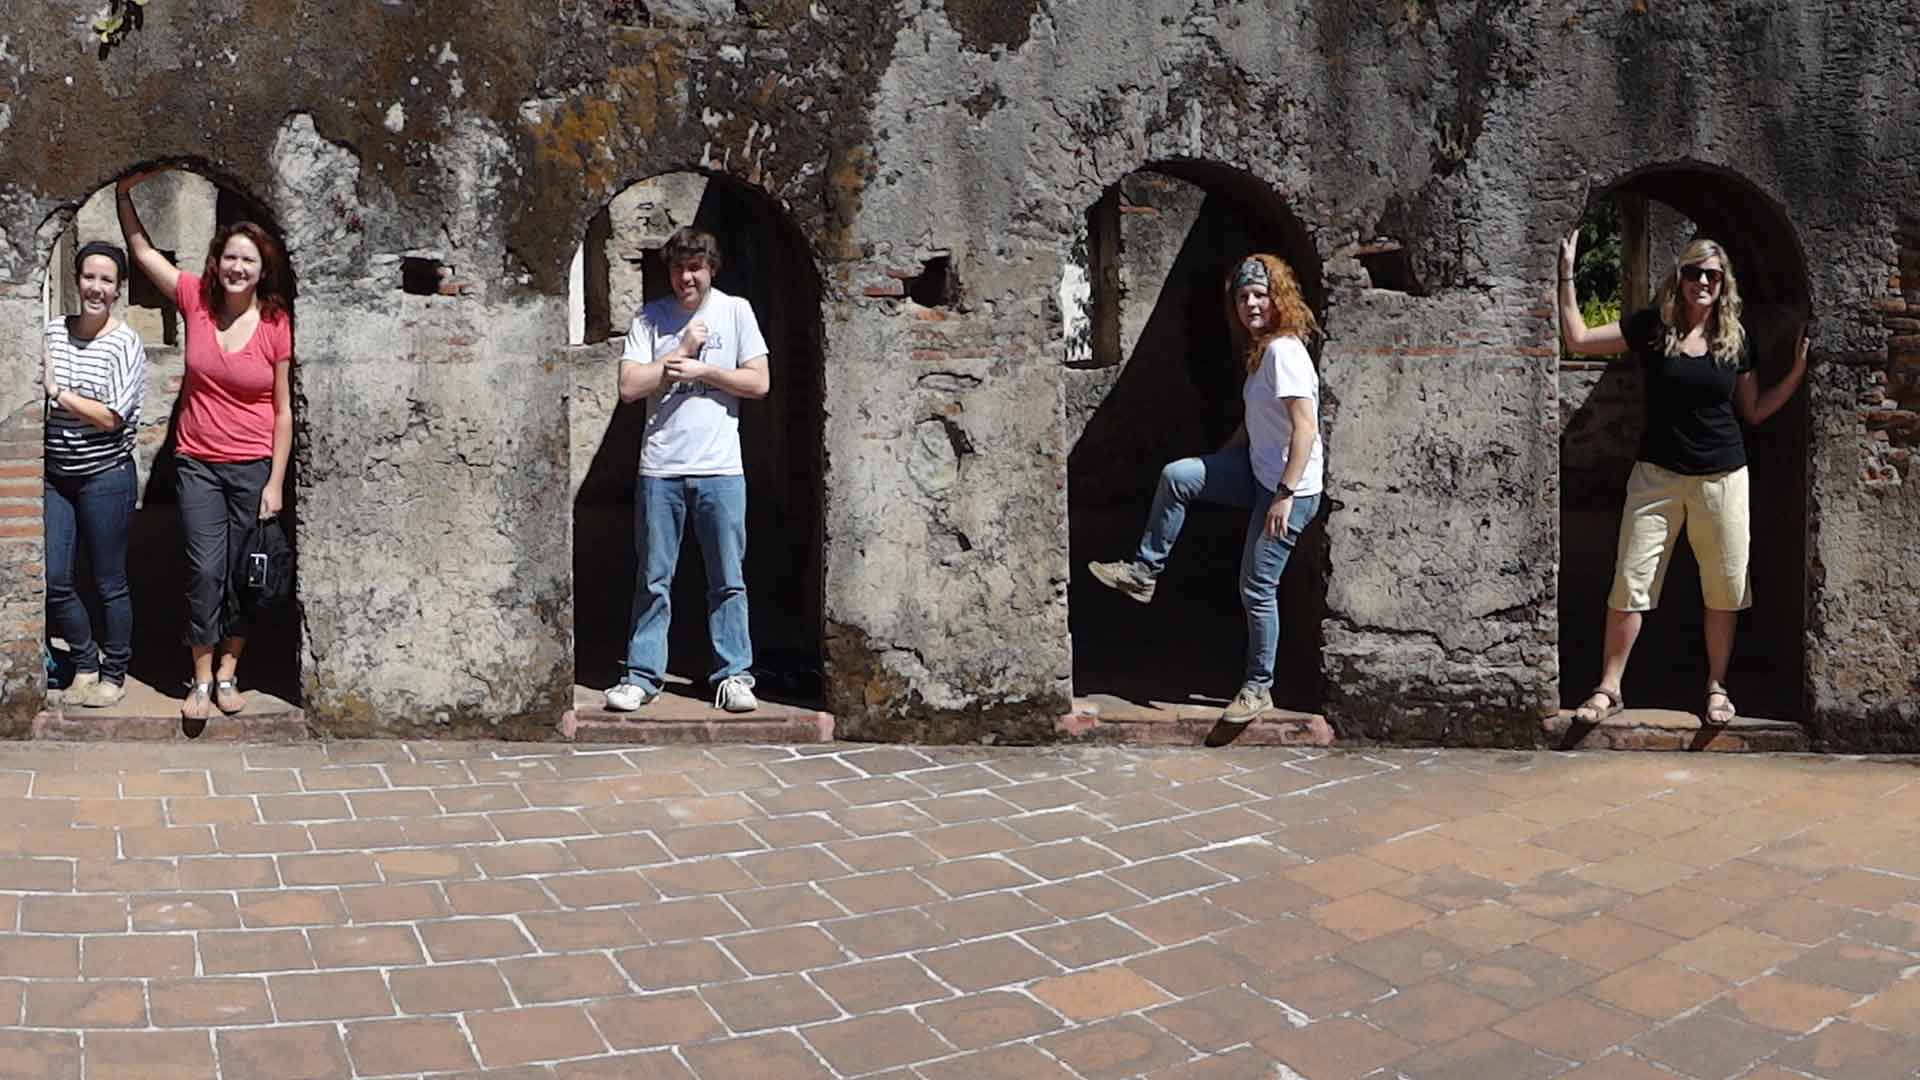 Study Abroad students posing for a photo in Guatemala.